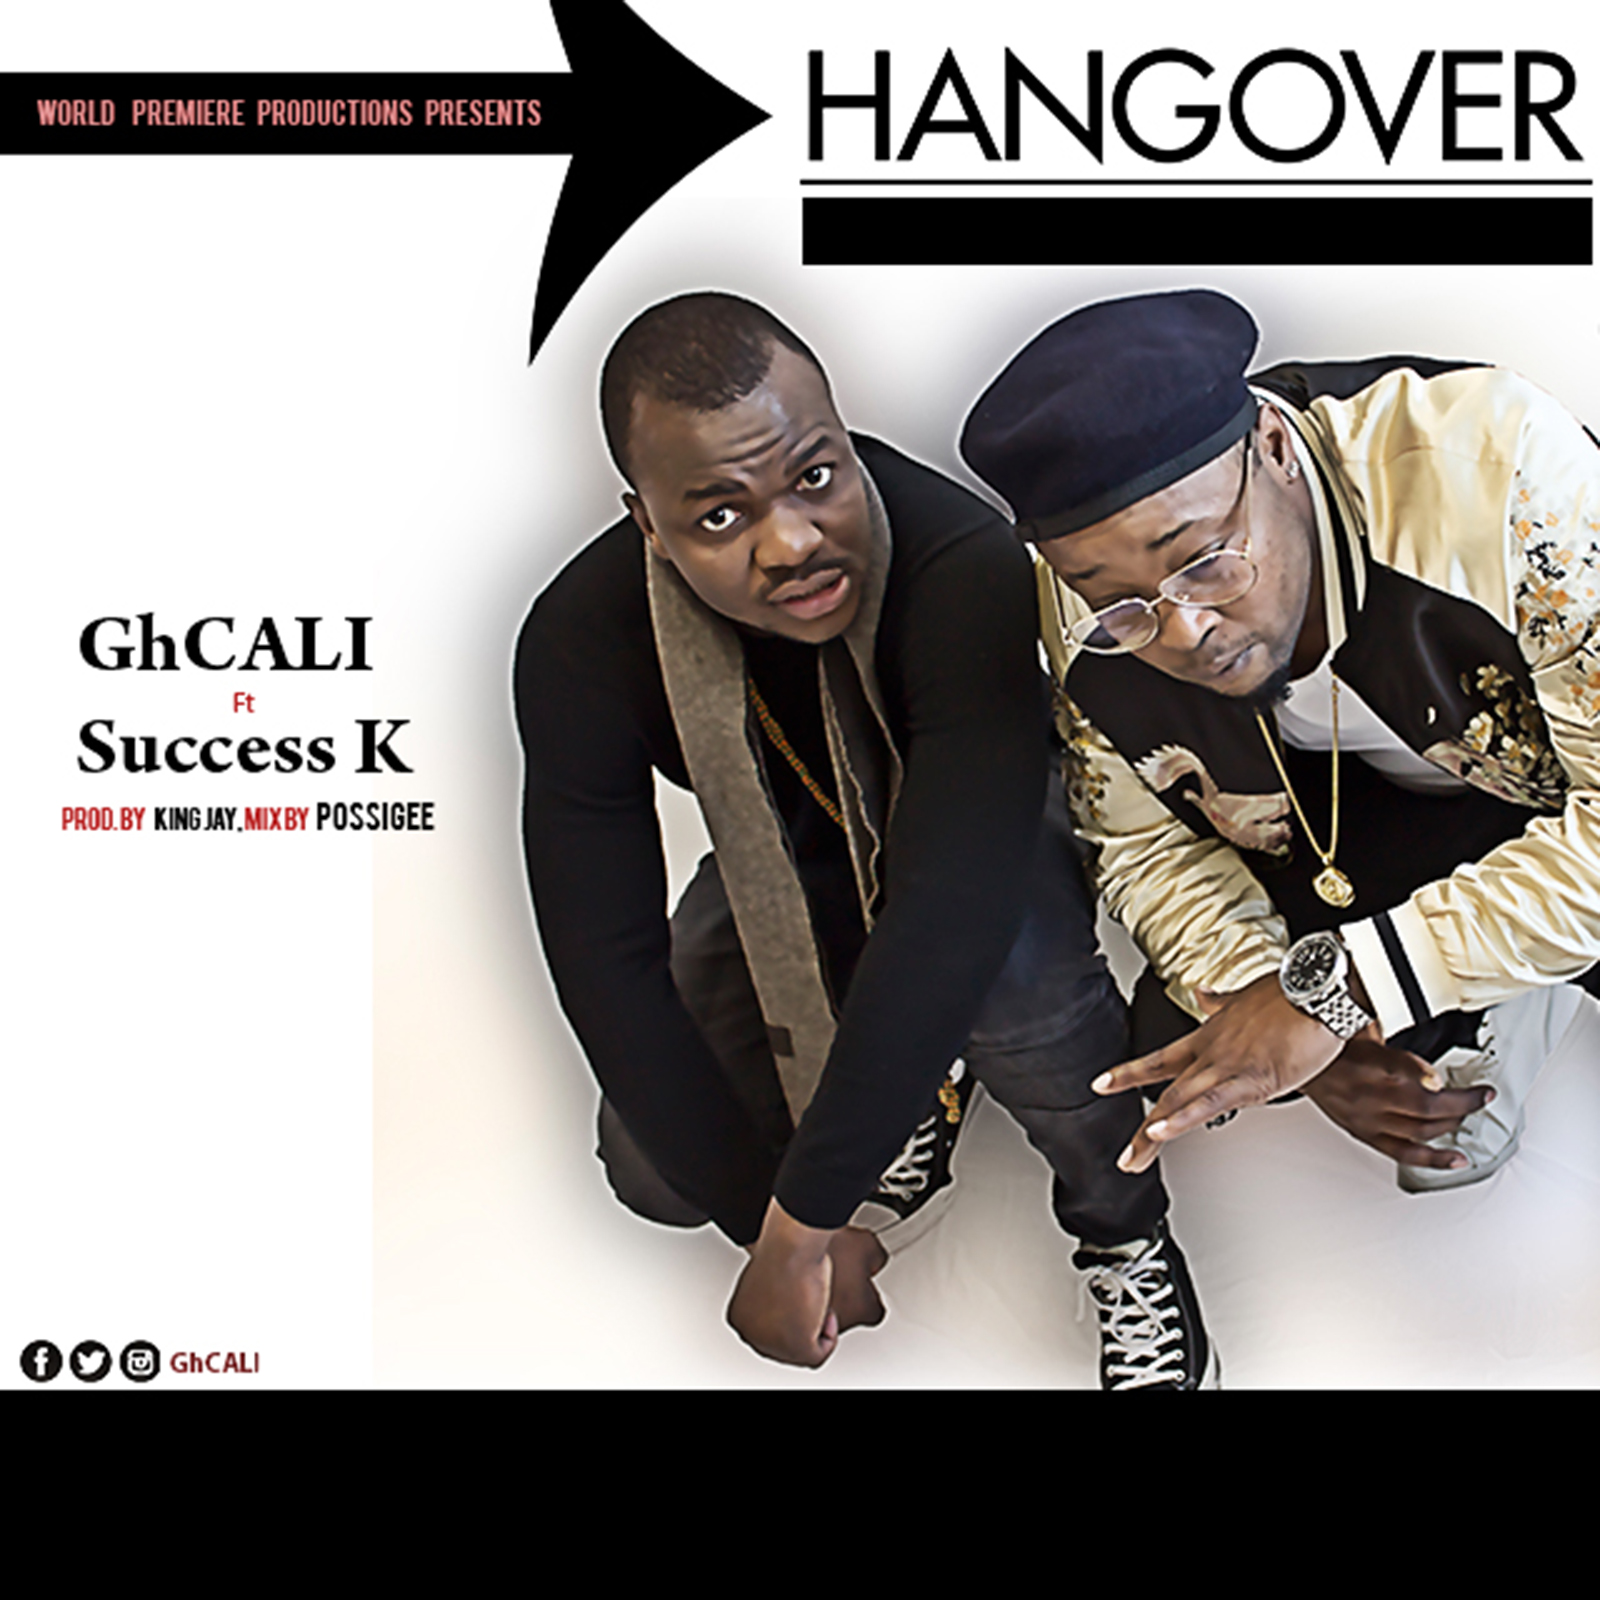 Hangover by GhCALI feat. Success K